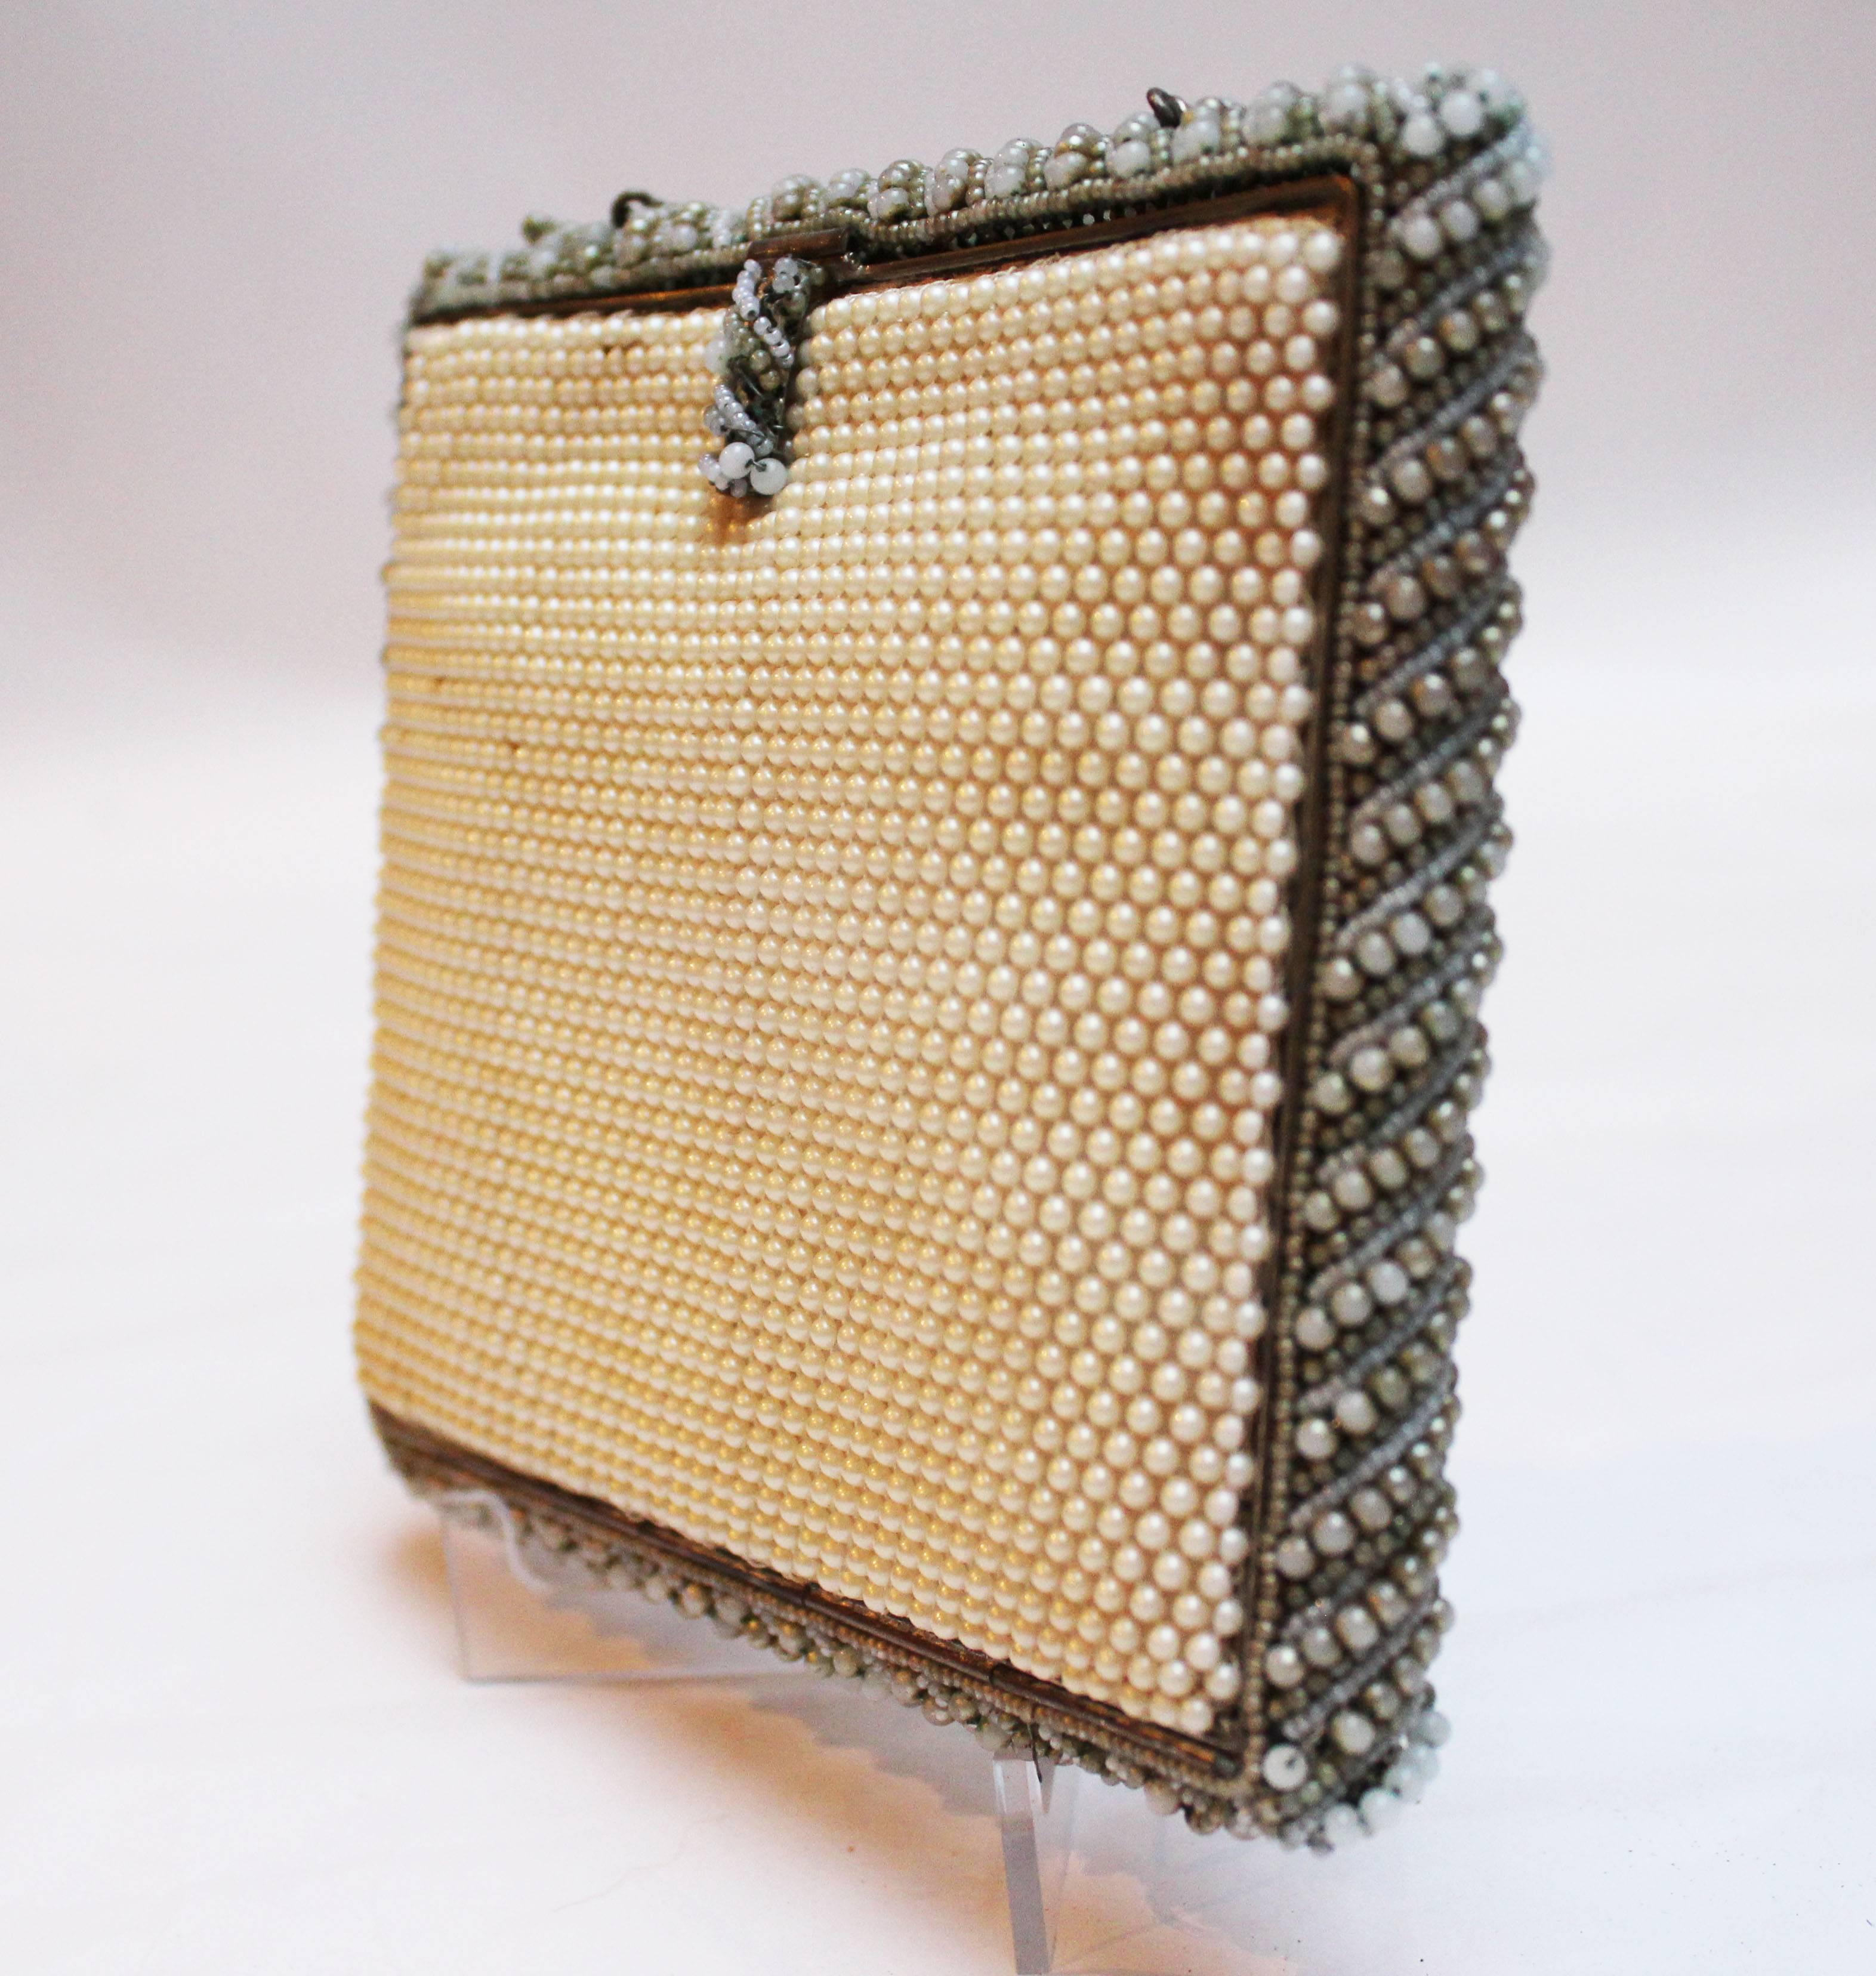 Vintage 1930s fully beaded evening bag with chain link handle with inner picket and a separate kiss lock purse attached inside and a small square vanity mirror. Perfect for a wedding bag or for bridesmaids.

Please note there are a few beads